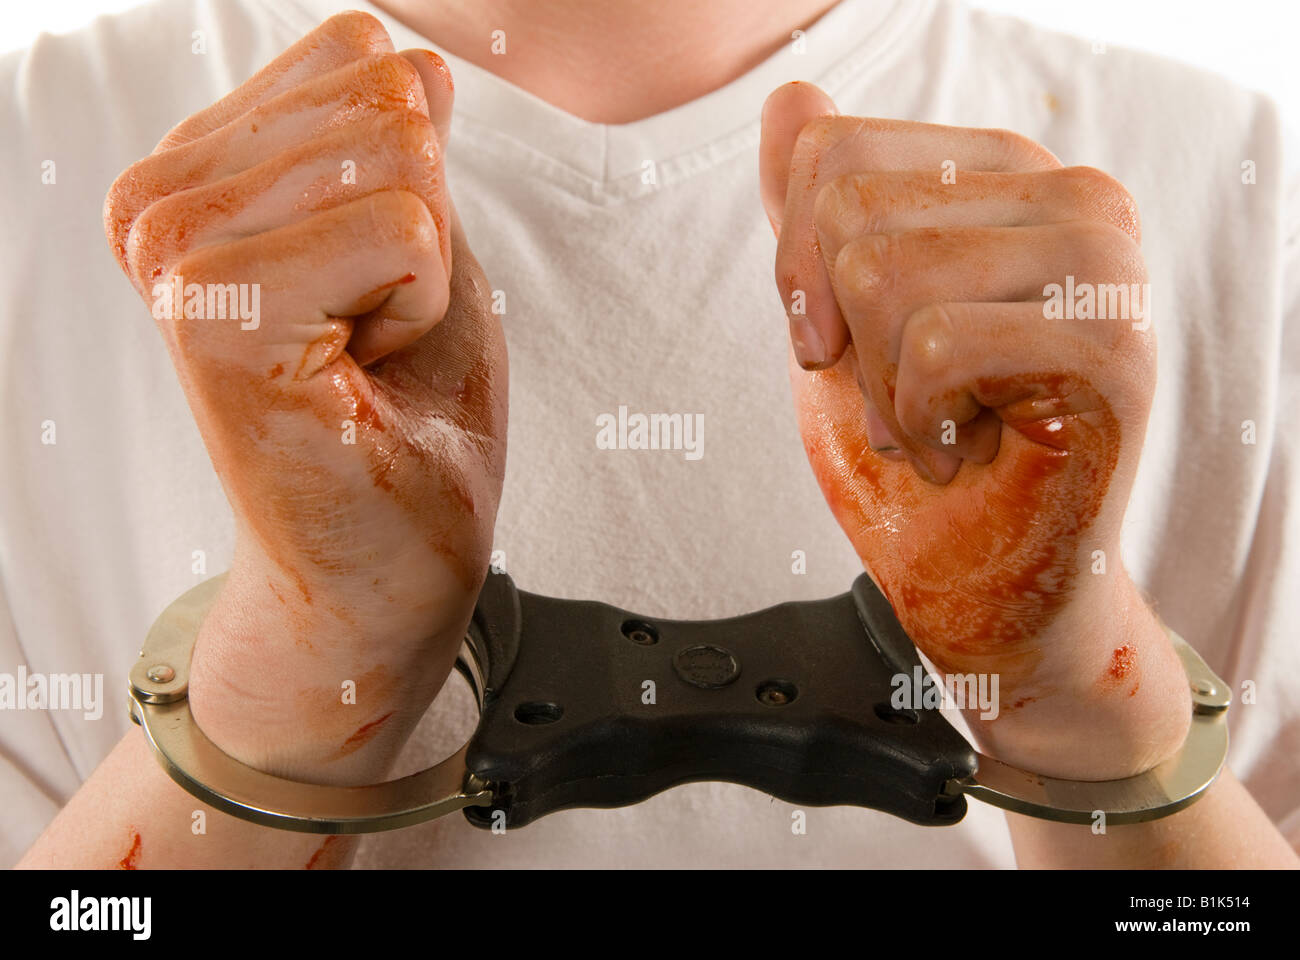 Handcuffed and bloody hands held up for inspection Stock Photo